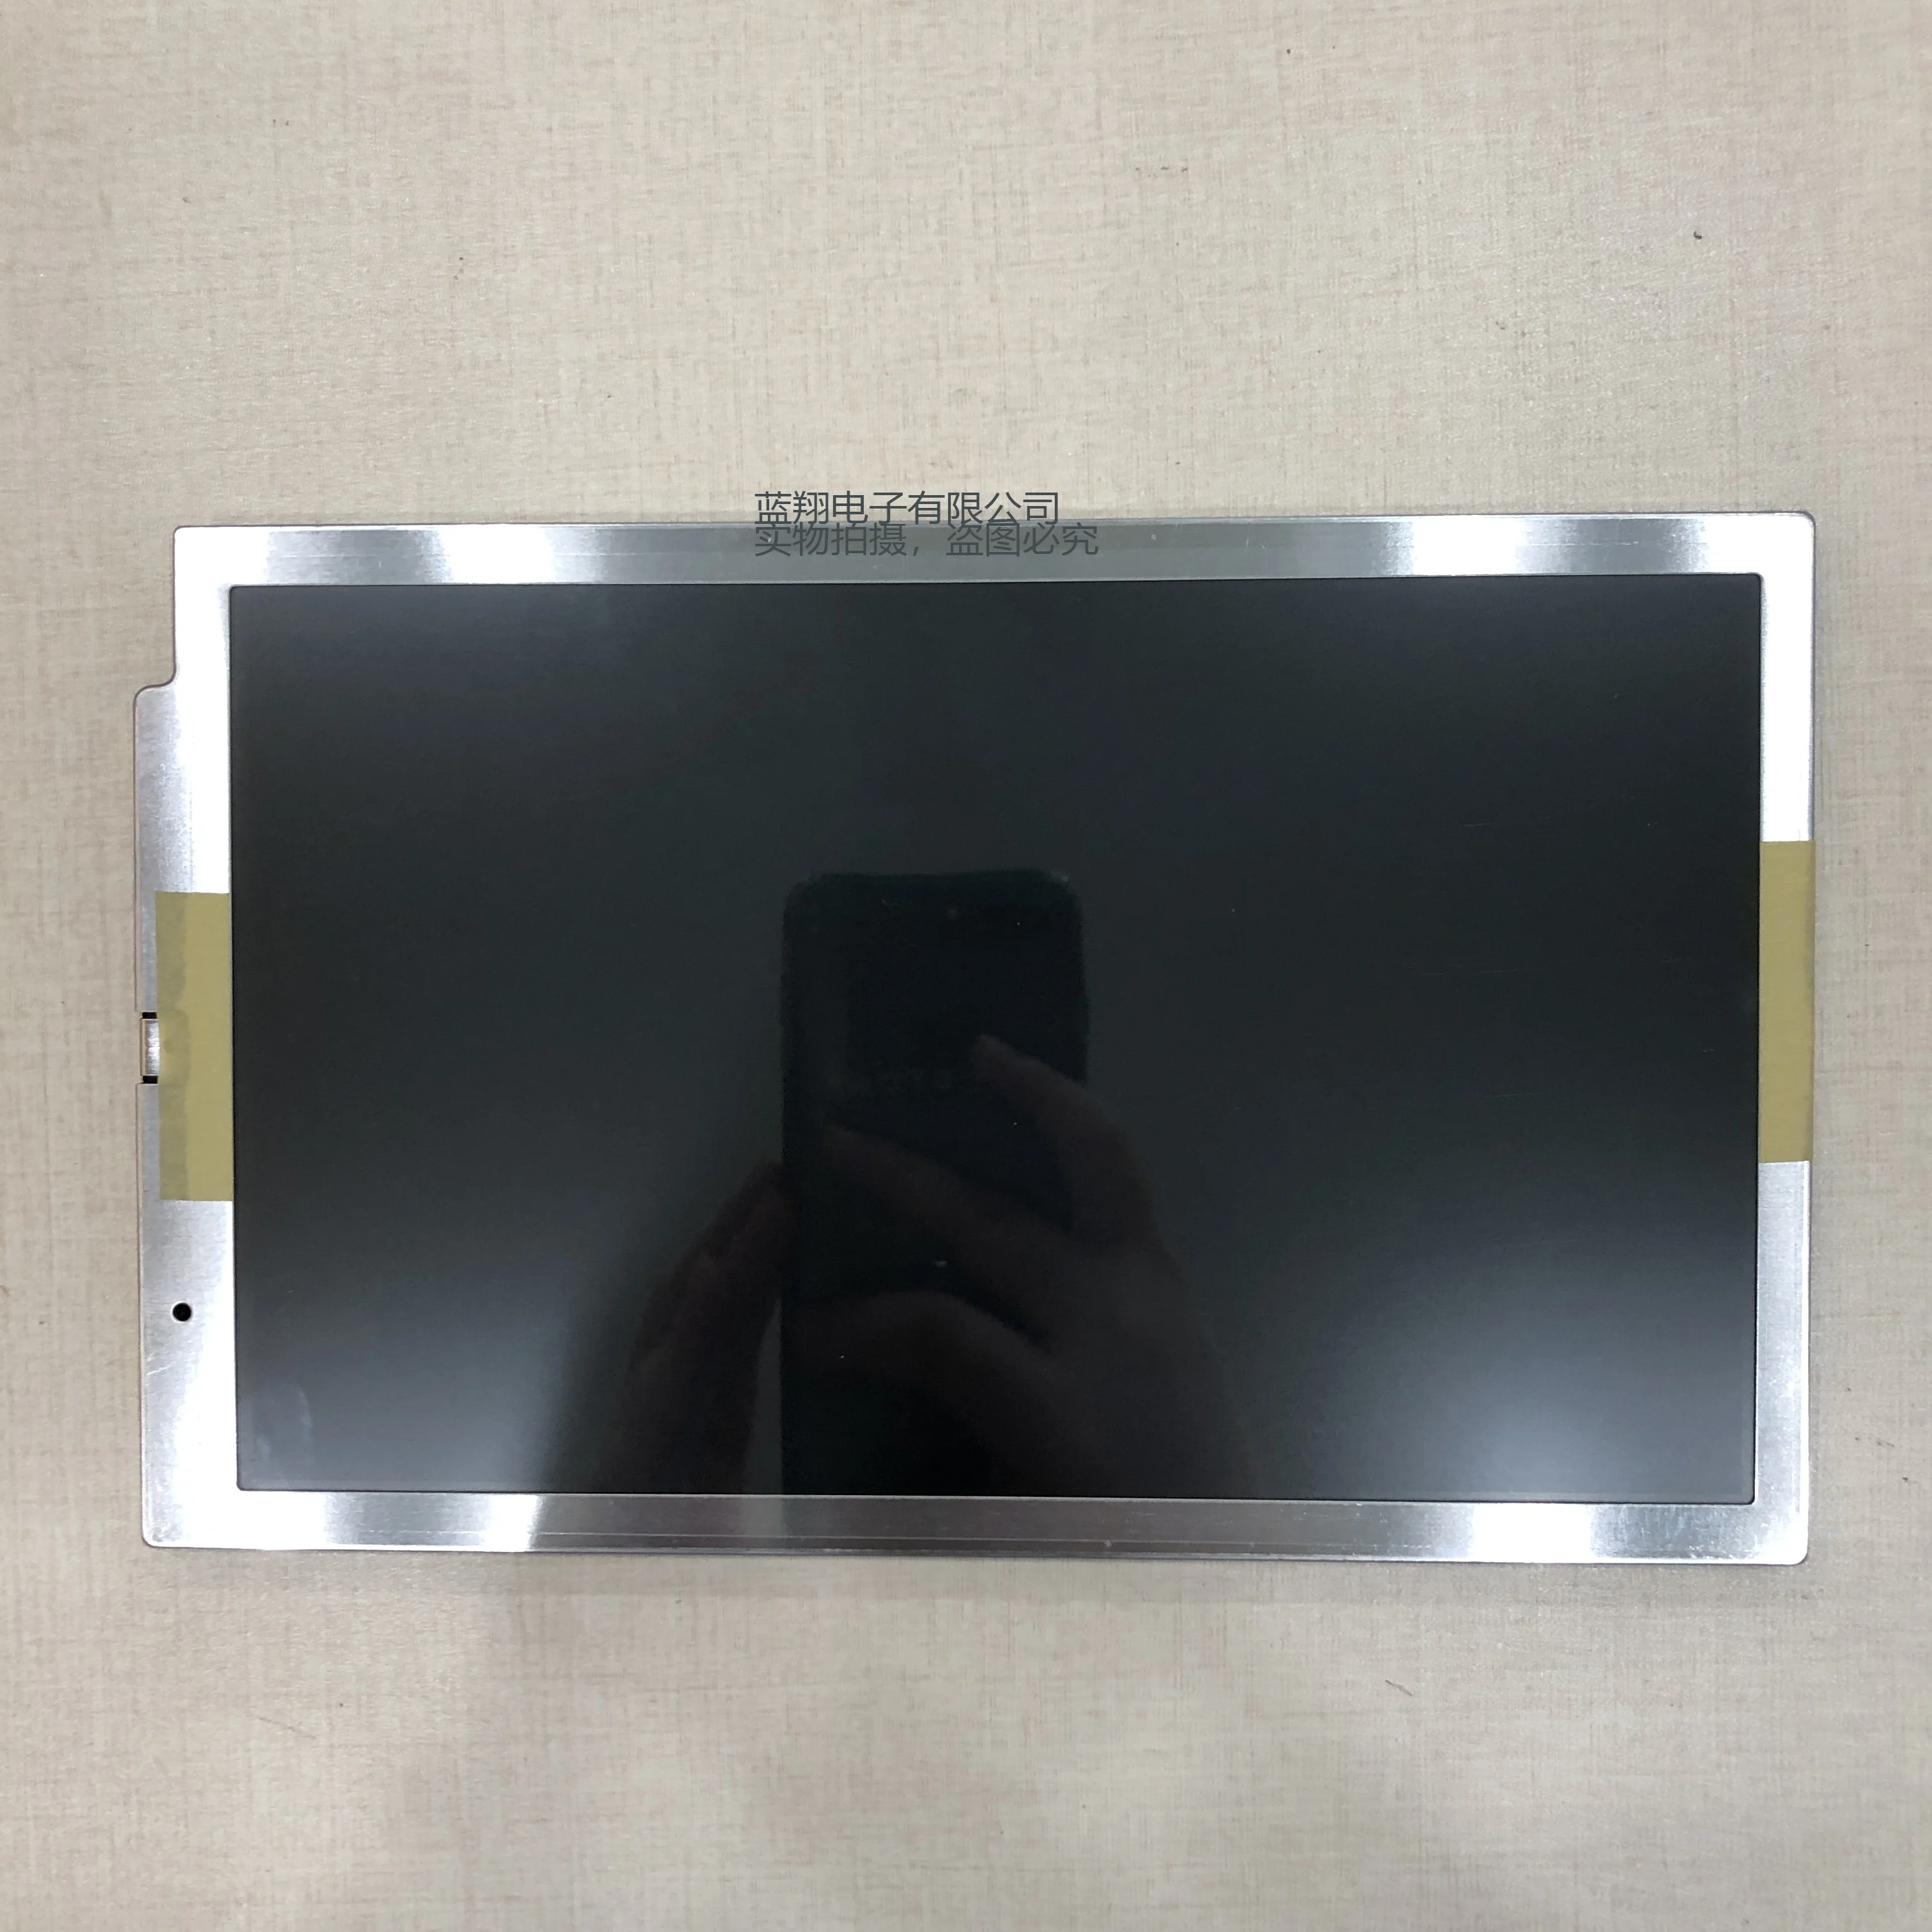 LCD Display for NL8048BC24-09D LCD Display Panel Brand New & Original jcd top bottom lower lcd display screen for nintend nds ndsl ndsi for 3ds new 3ds ll xl for gba sp repair parts display panel